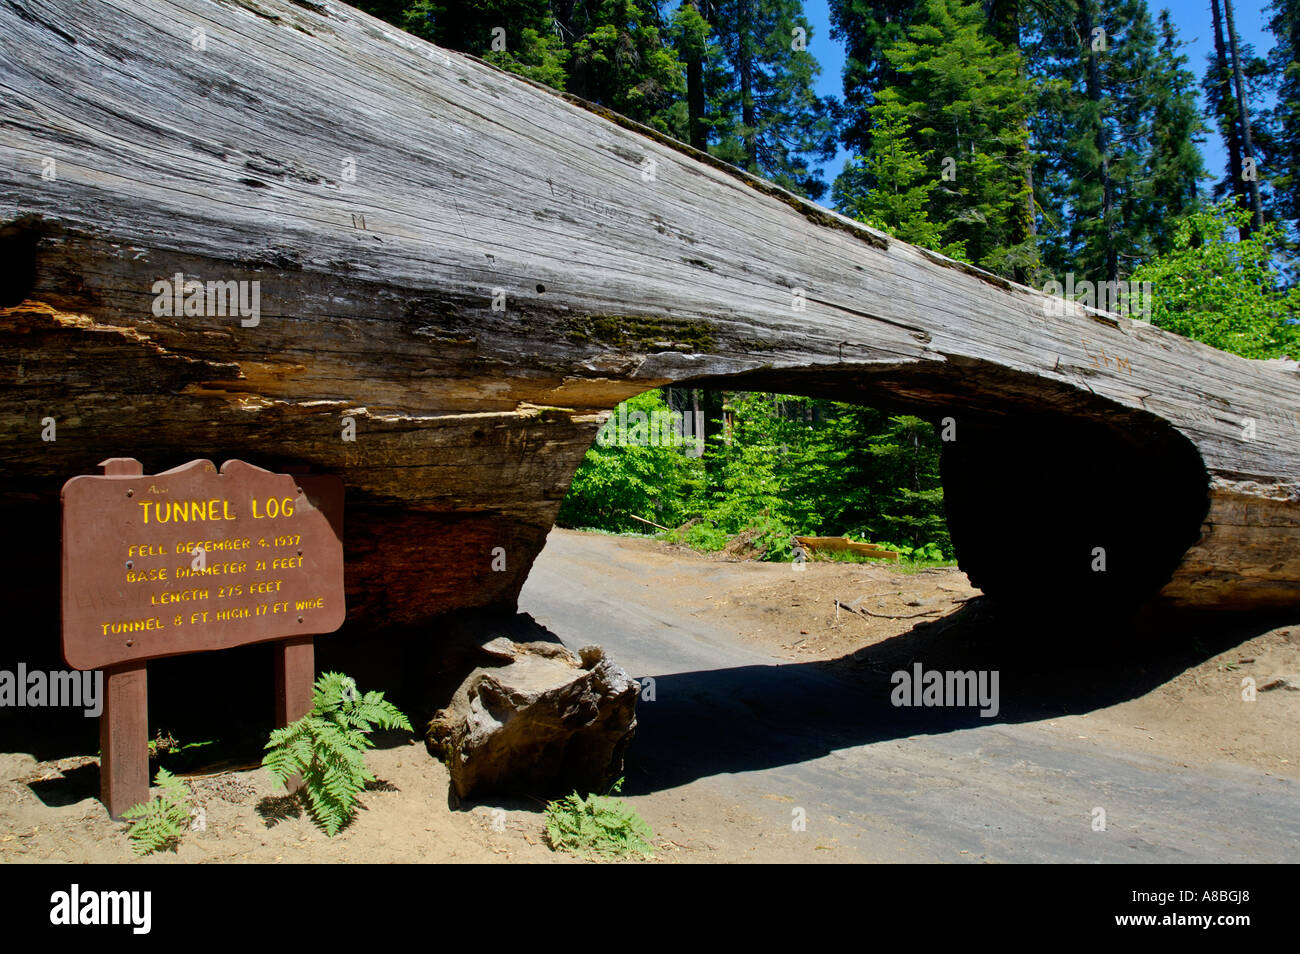 Carved opening for cars to drive through fallen tree trunk Tunnel Log Sequoia National Park California Stock Photo